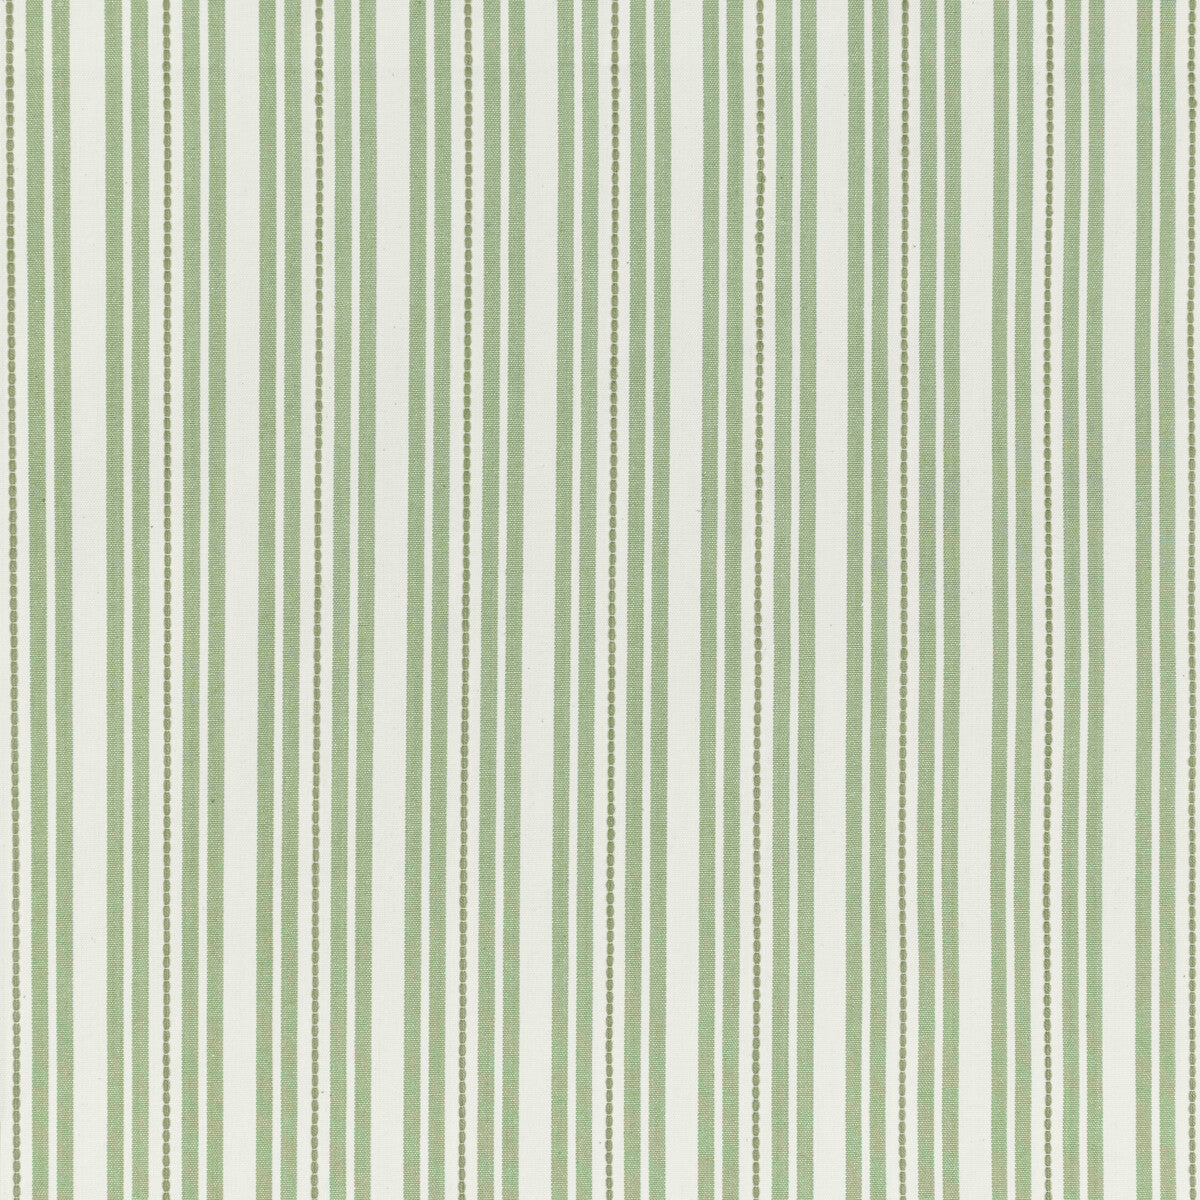 Basics fabric in 36046-30 color - pattern 36046.30.0 - by Kravet Basics in the L&